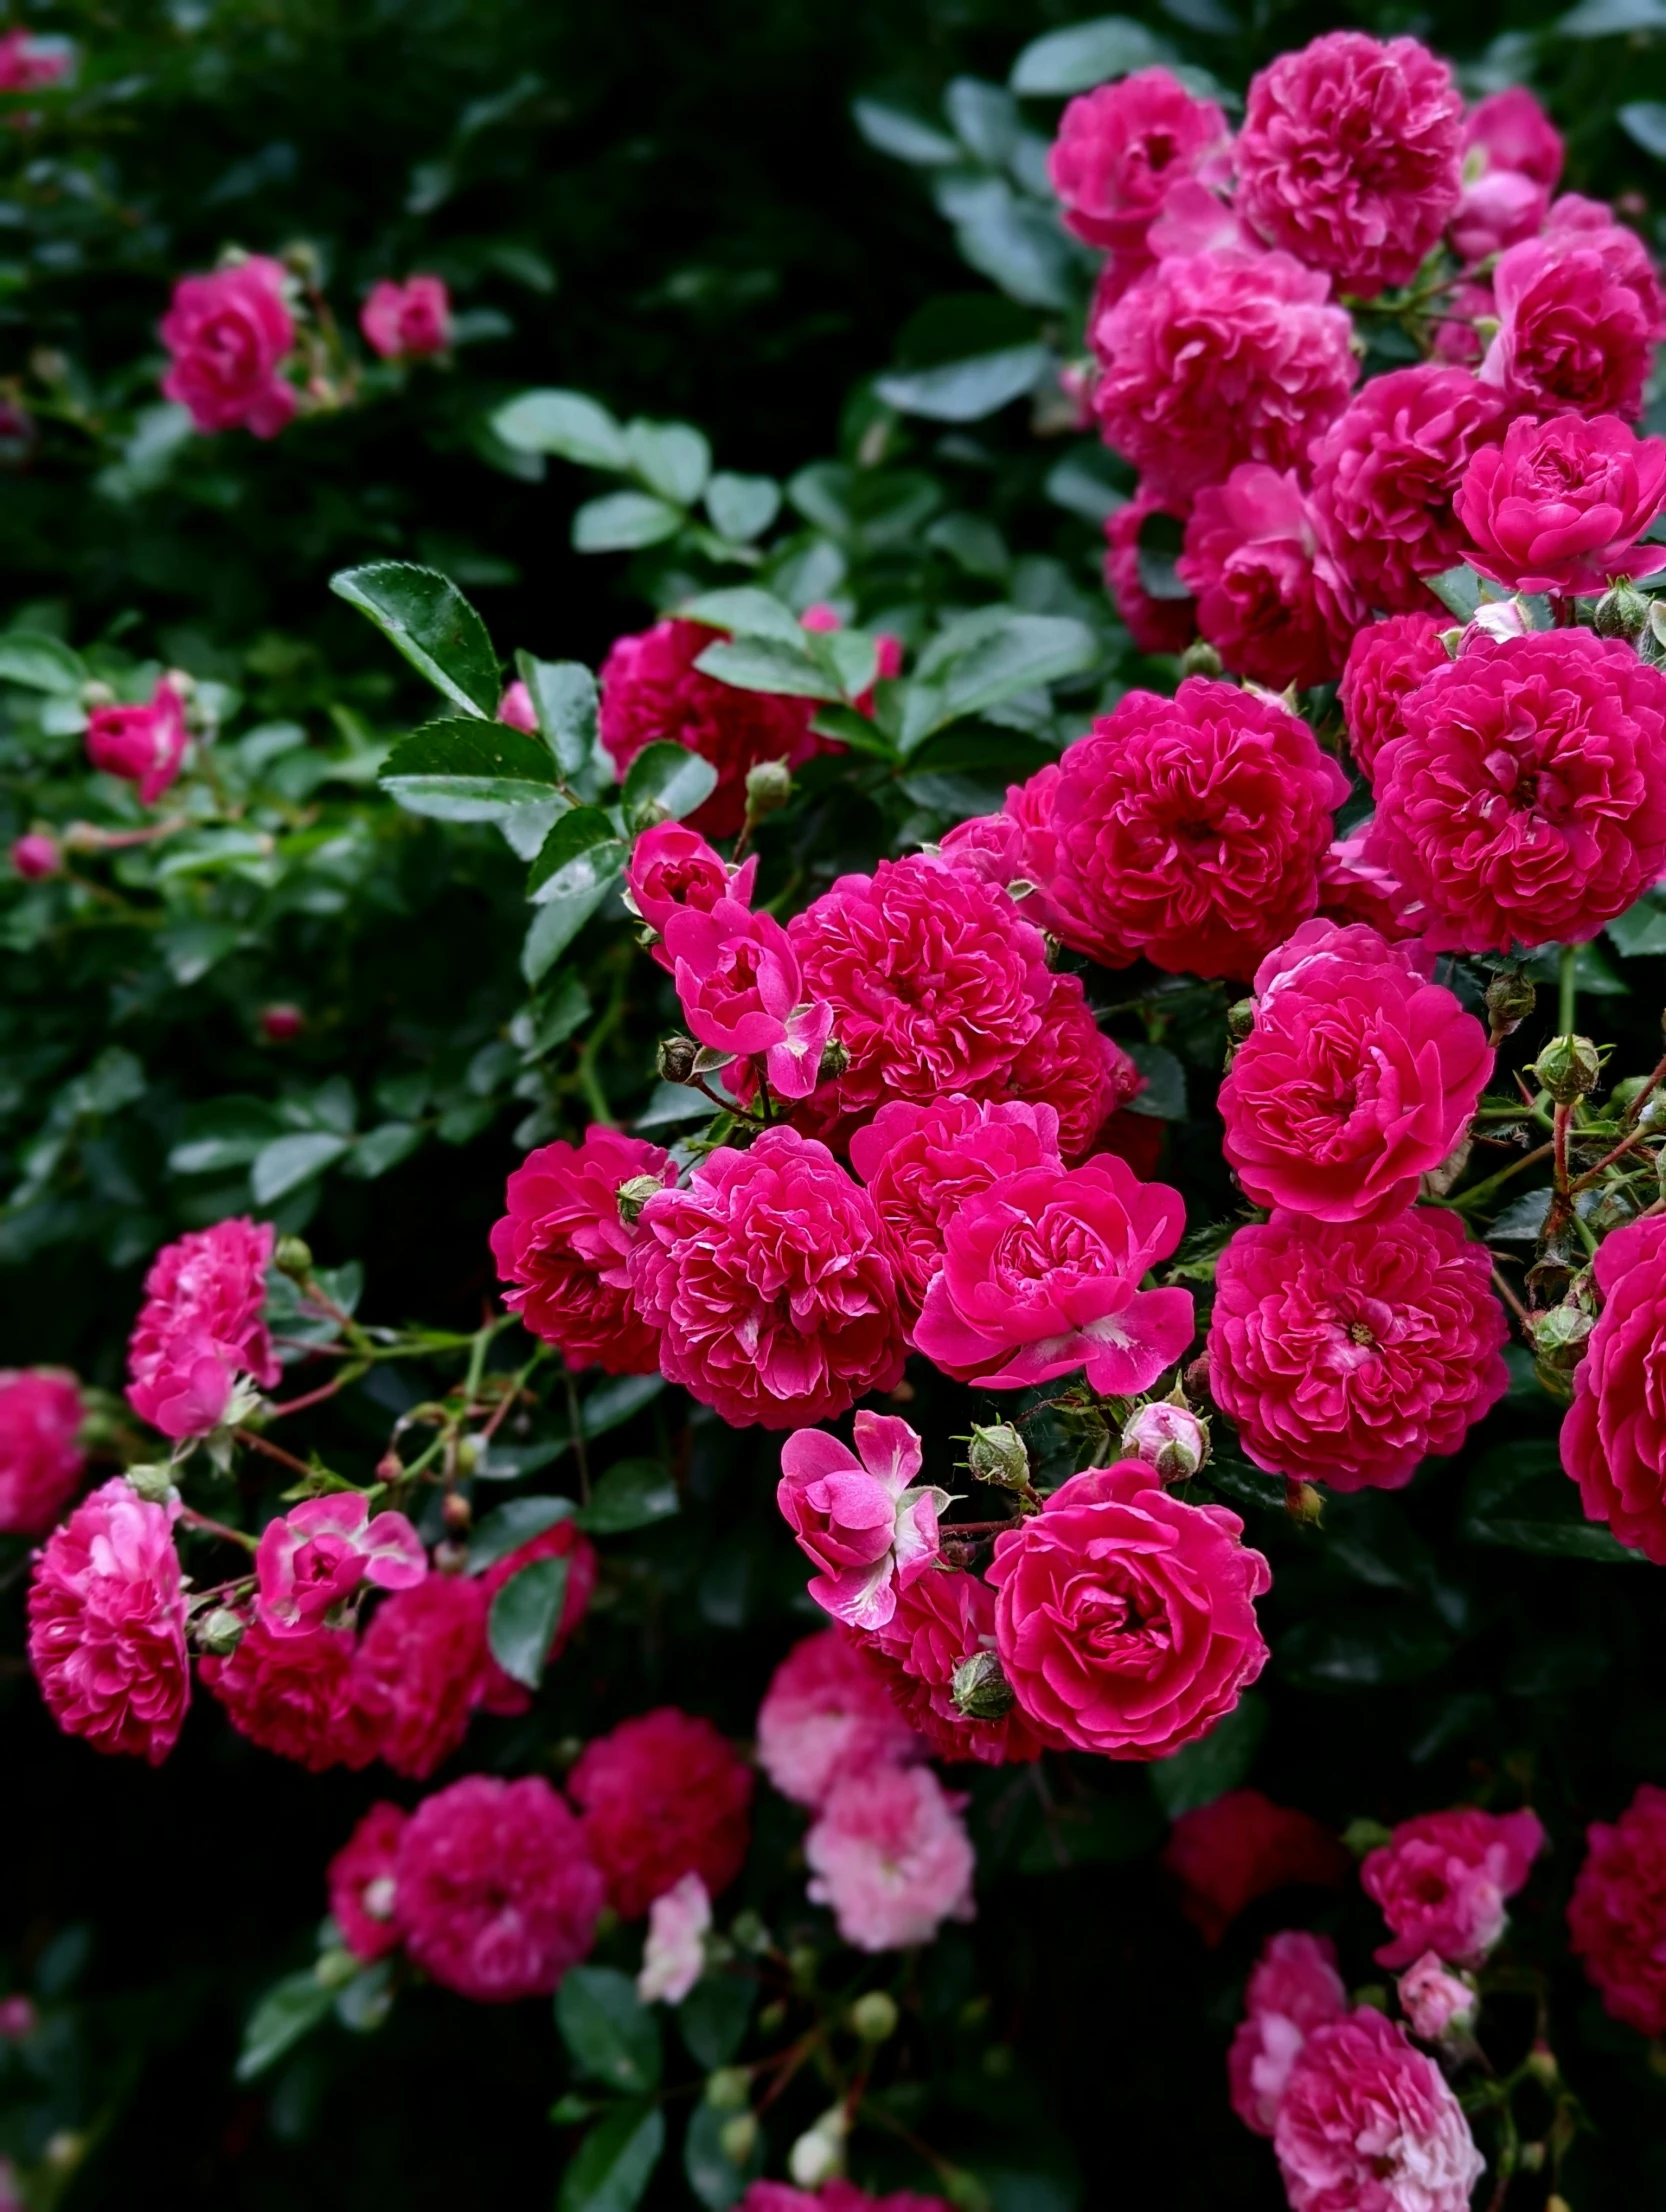 many pink flowers with green leaves and bushes